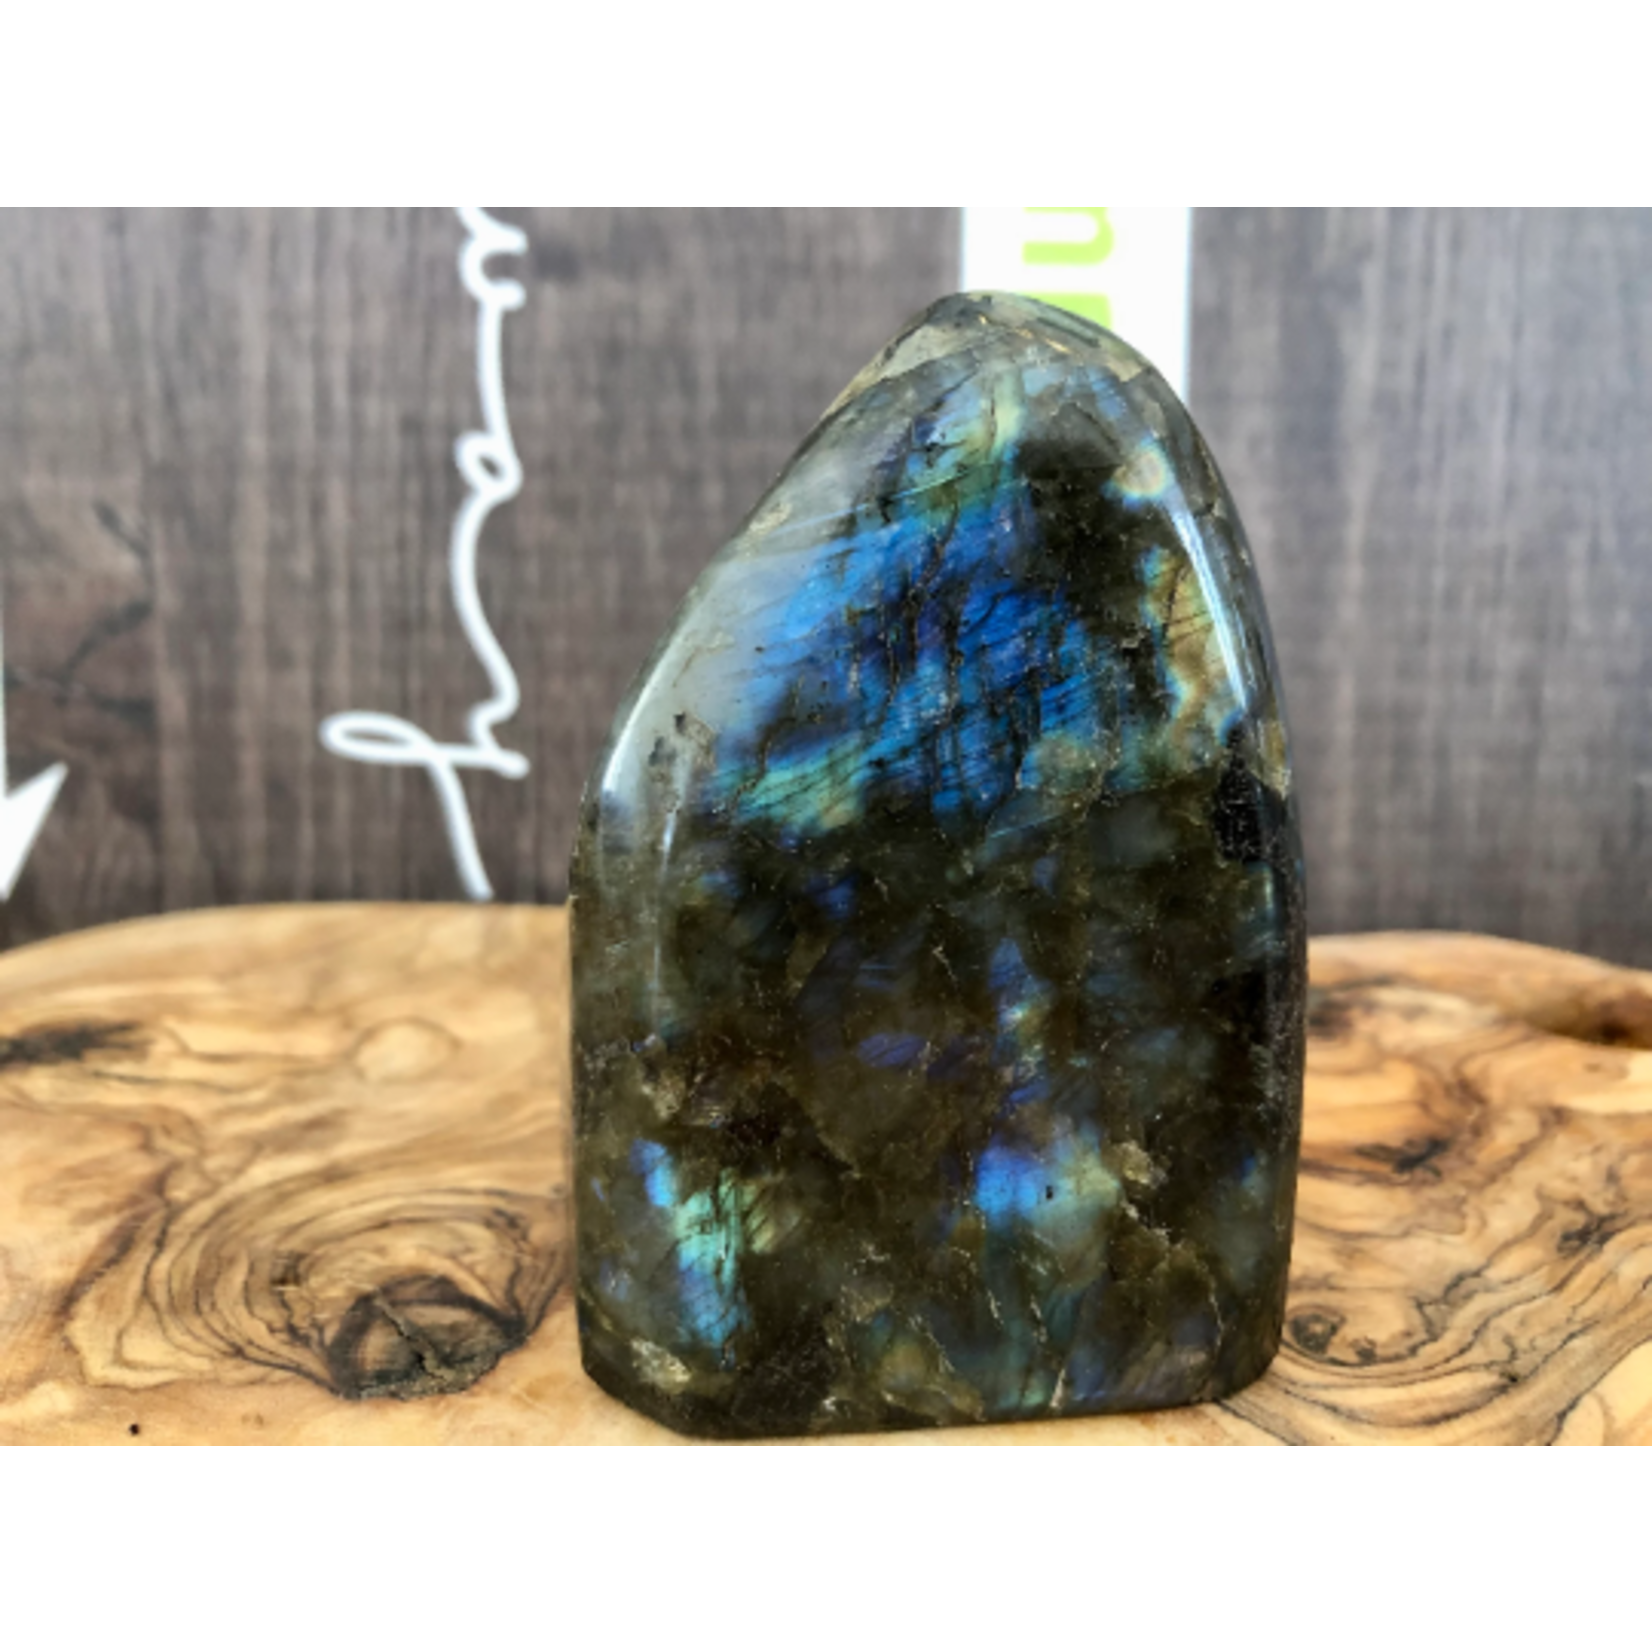 pretty labradorite free form, stimulates the imagination and calms an overactive mind, developing enthusiasm and new ideas